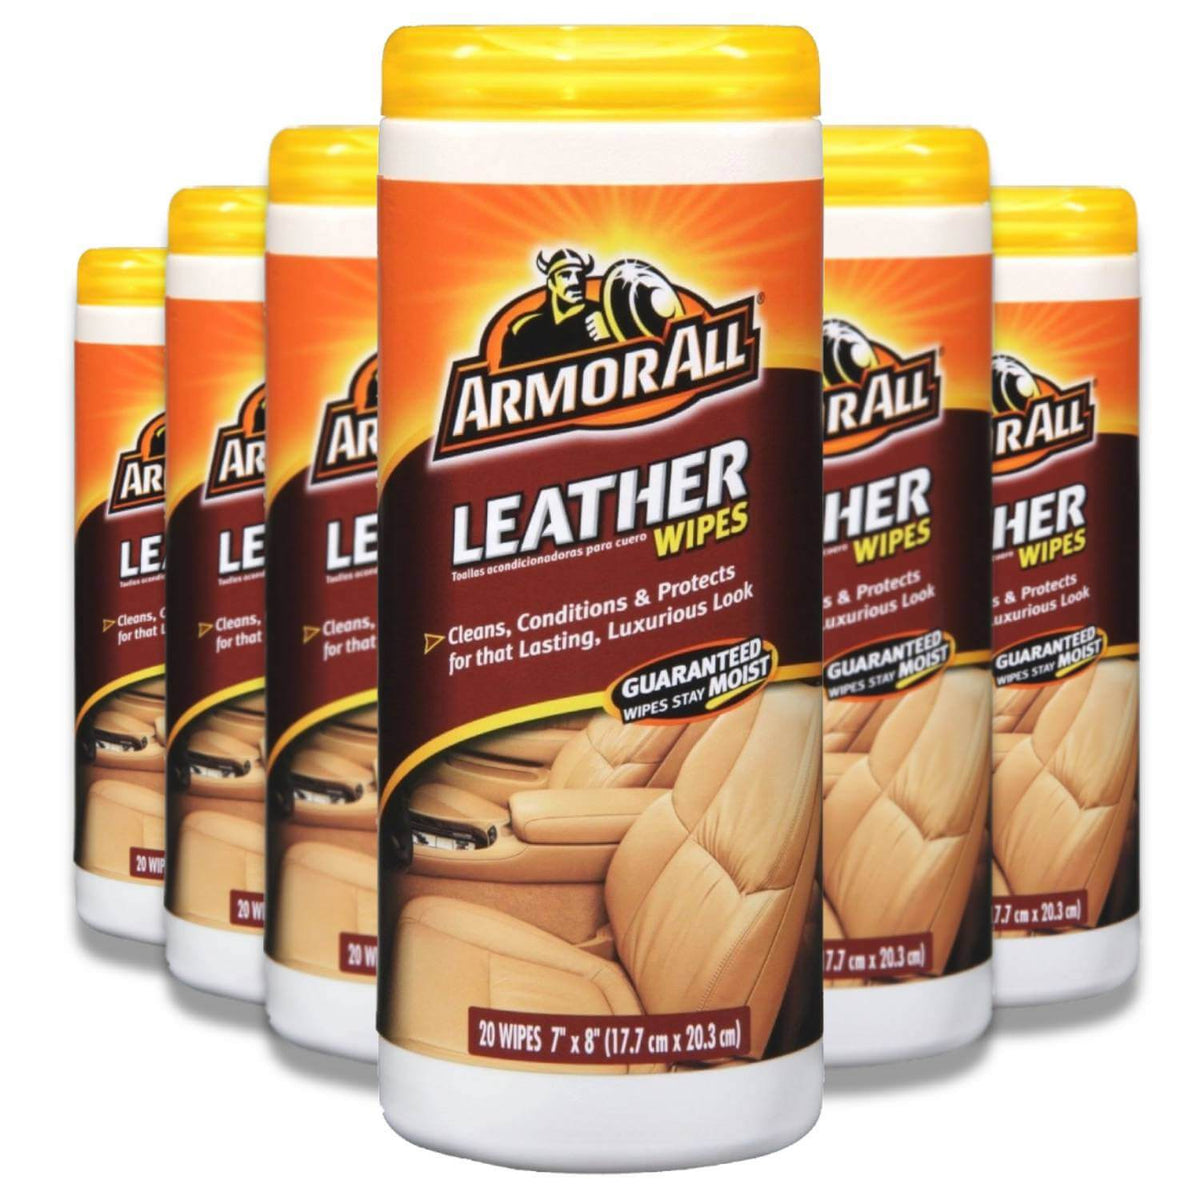 Armor All Leather Wipes, 7in x 8in, 2 Count Per Package, Vending Pack of 100